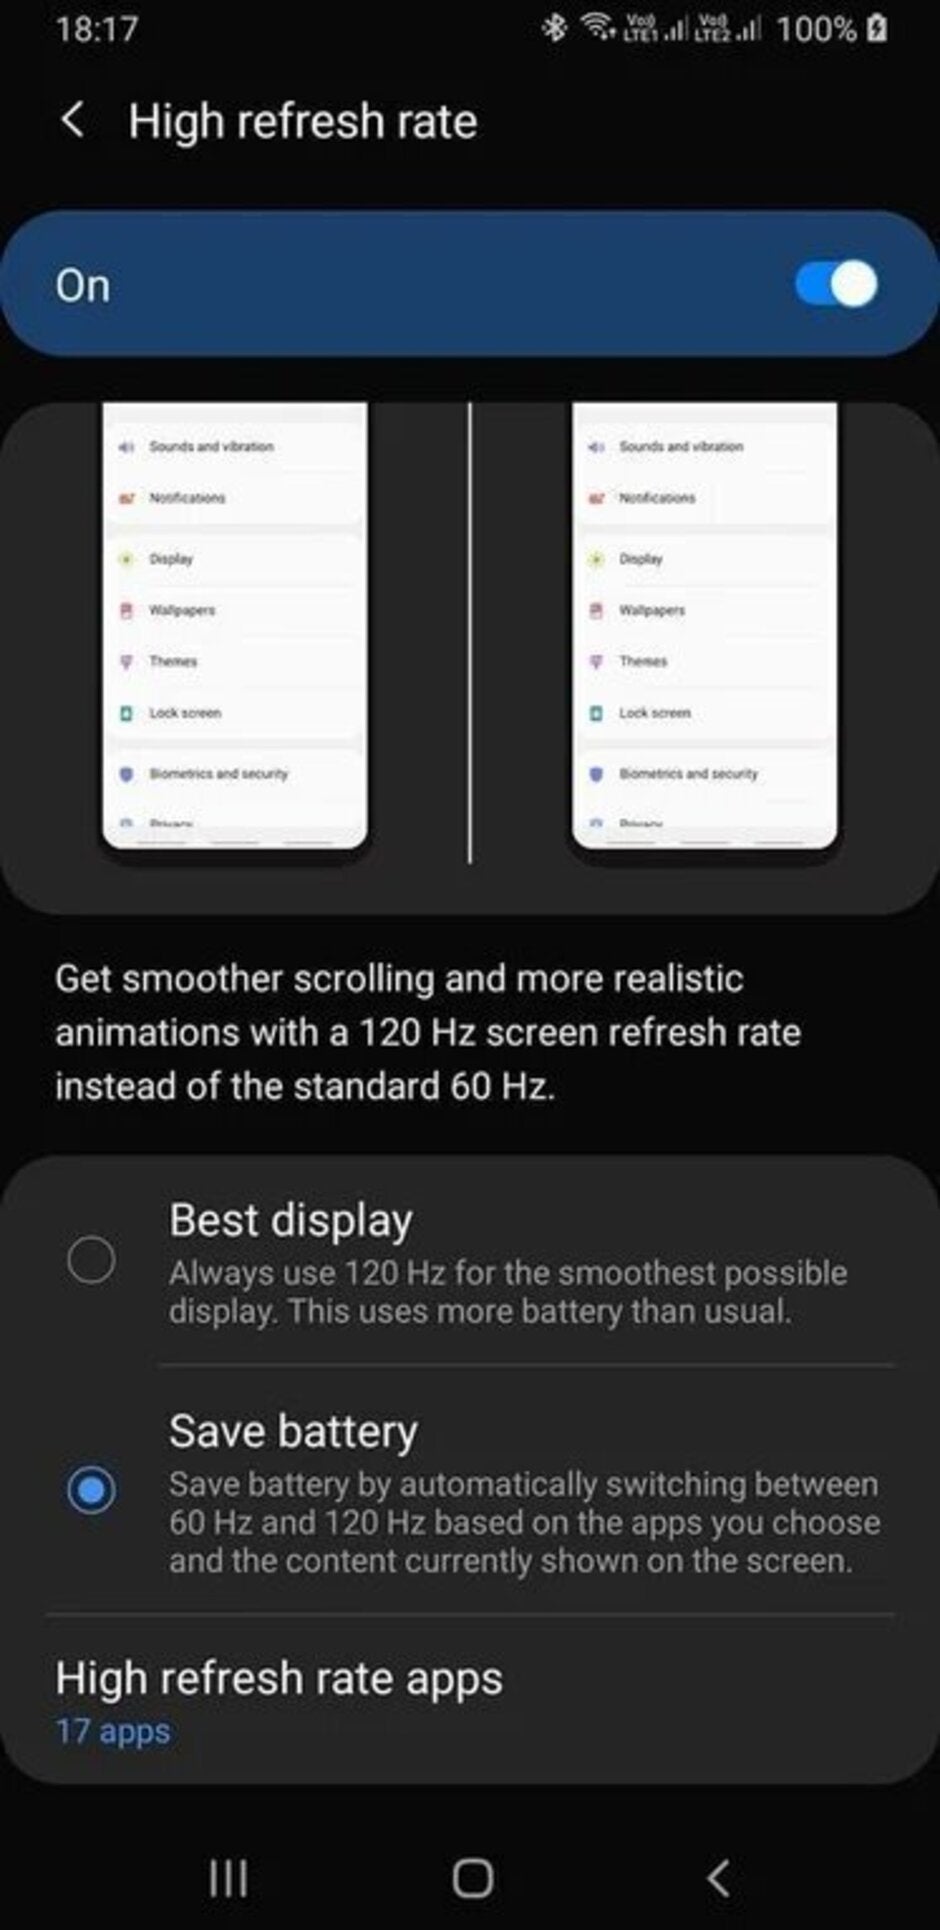 The Galaxy S11 could feature a 120Hz high refresh rate mode - Hidden menu hints at 120Hz refresh rate for the Samsung Galaxy S11